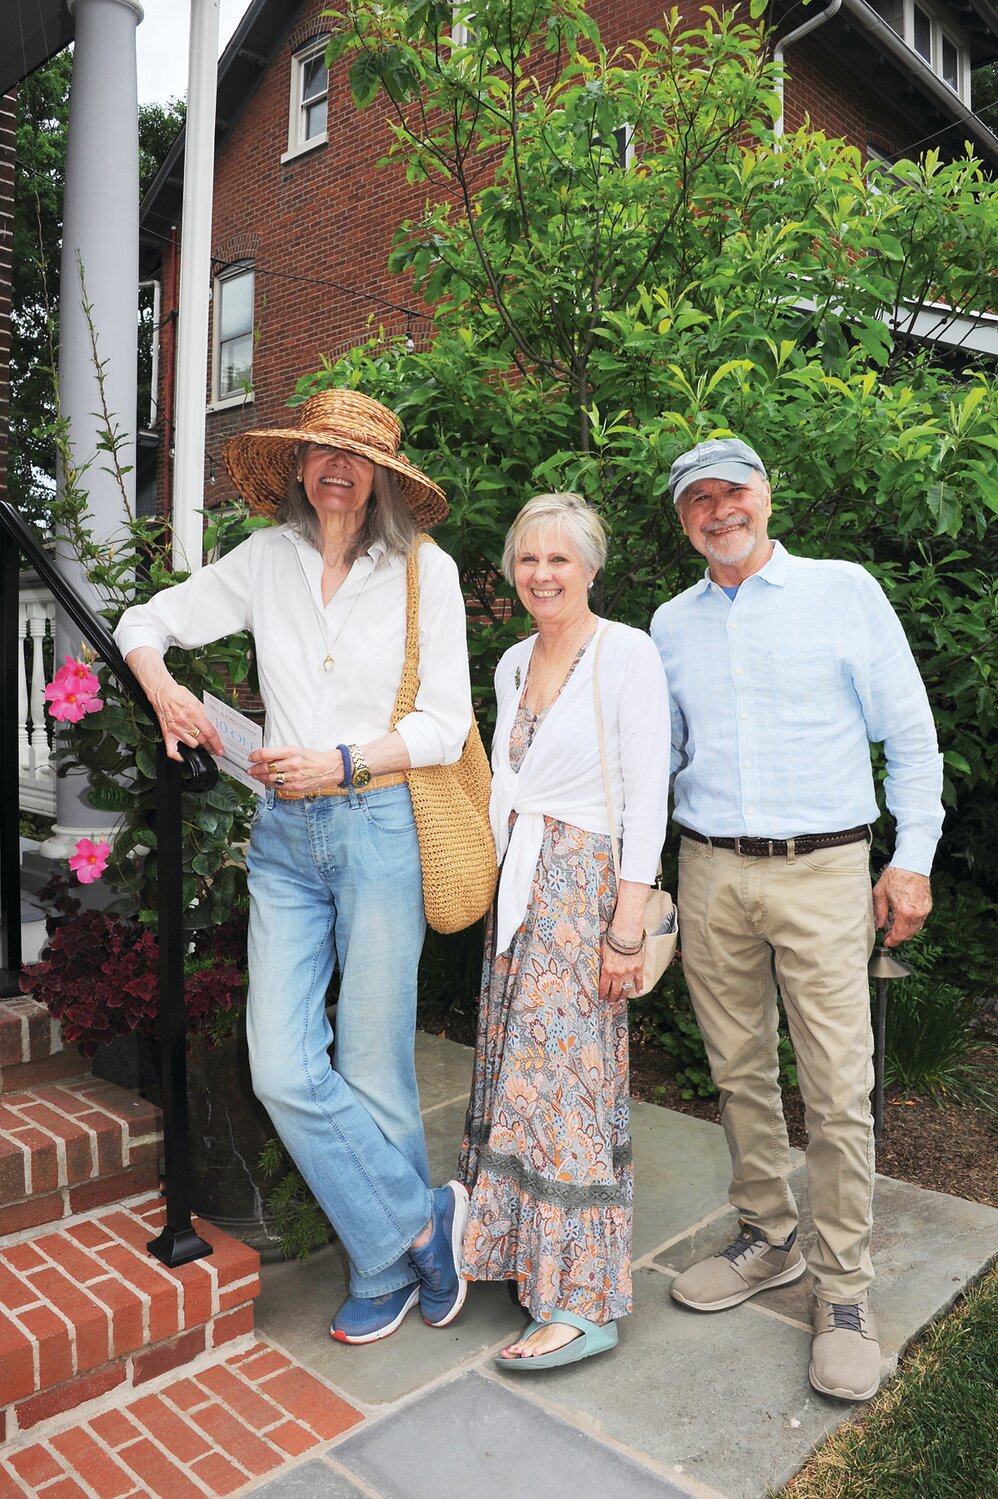 Barbara Julian, Dorothy Weiss, Henry Friedberger are ready to view the Koenig gardens.